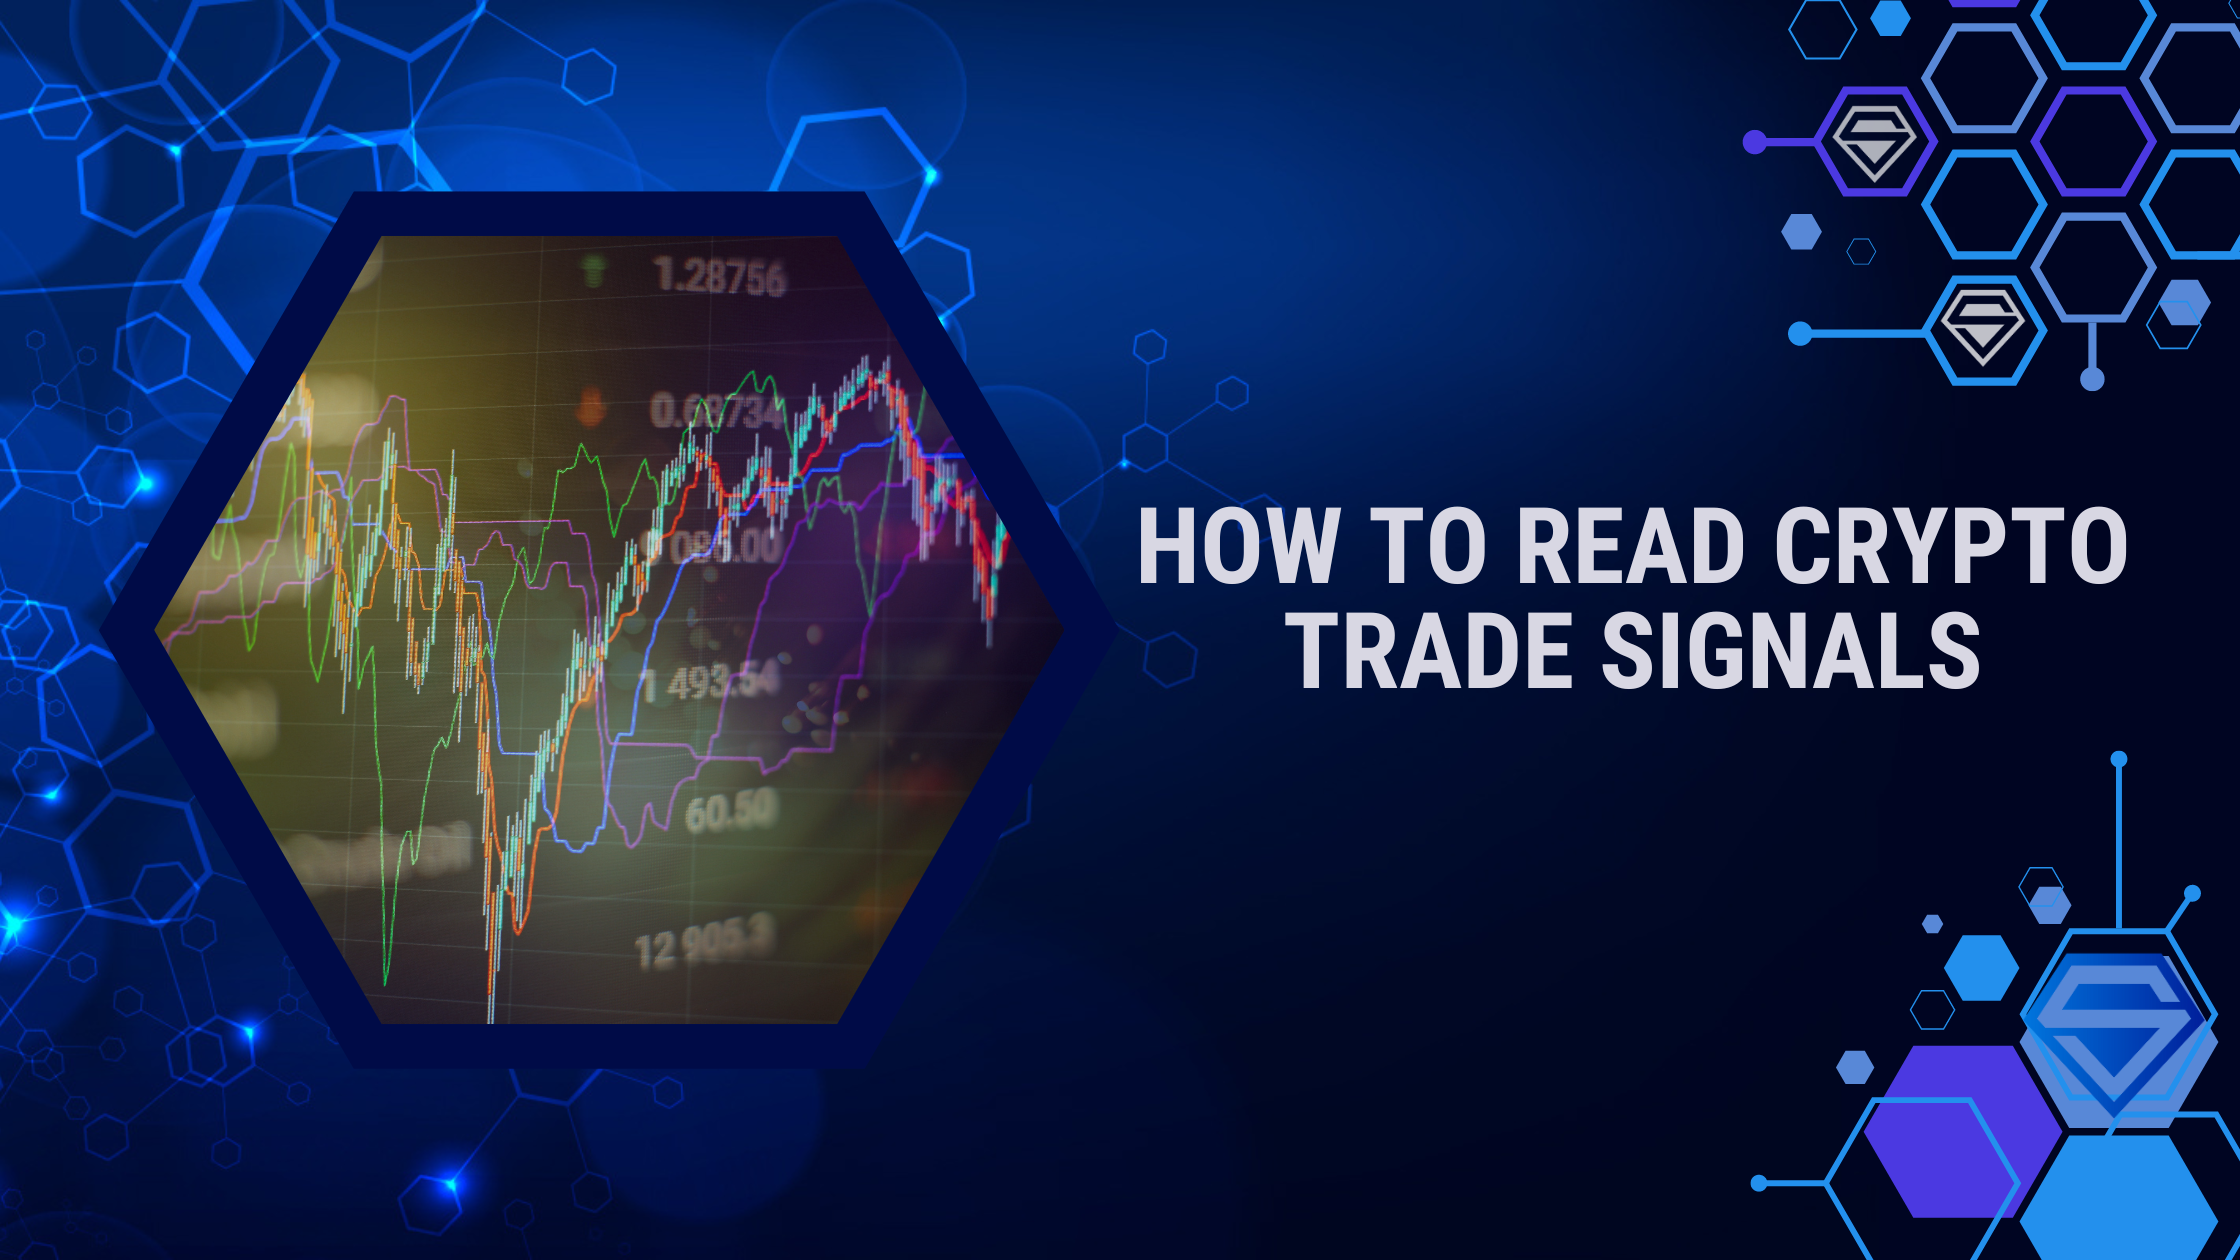 How to Read Crypto Trade Signals